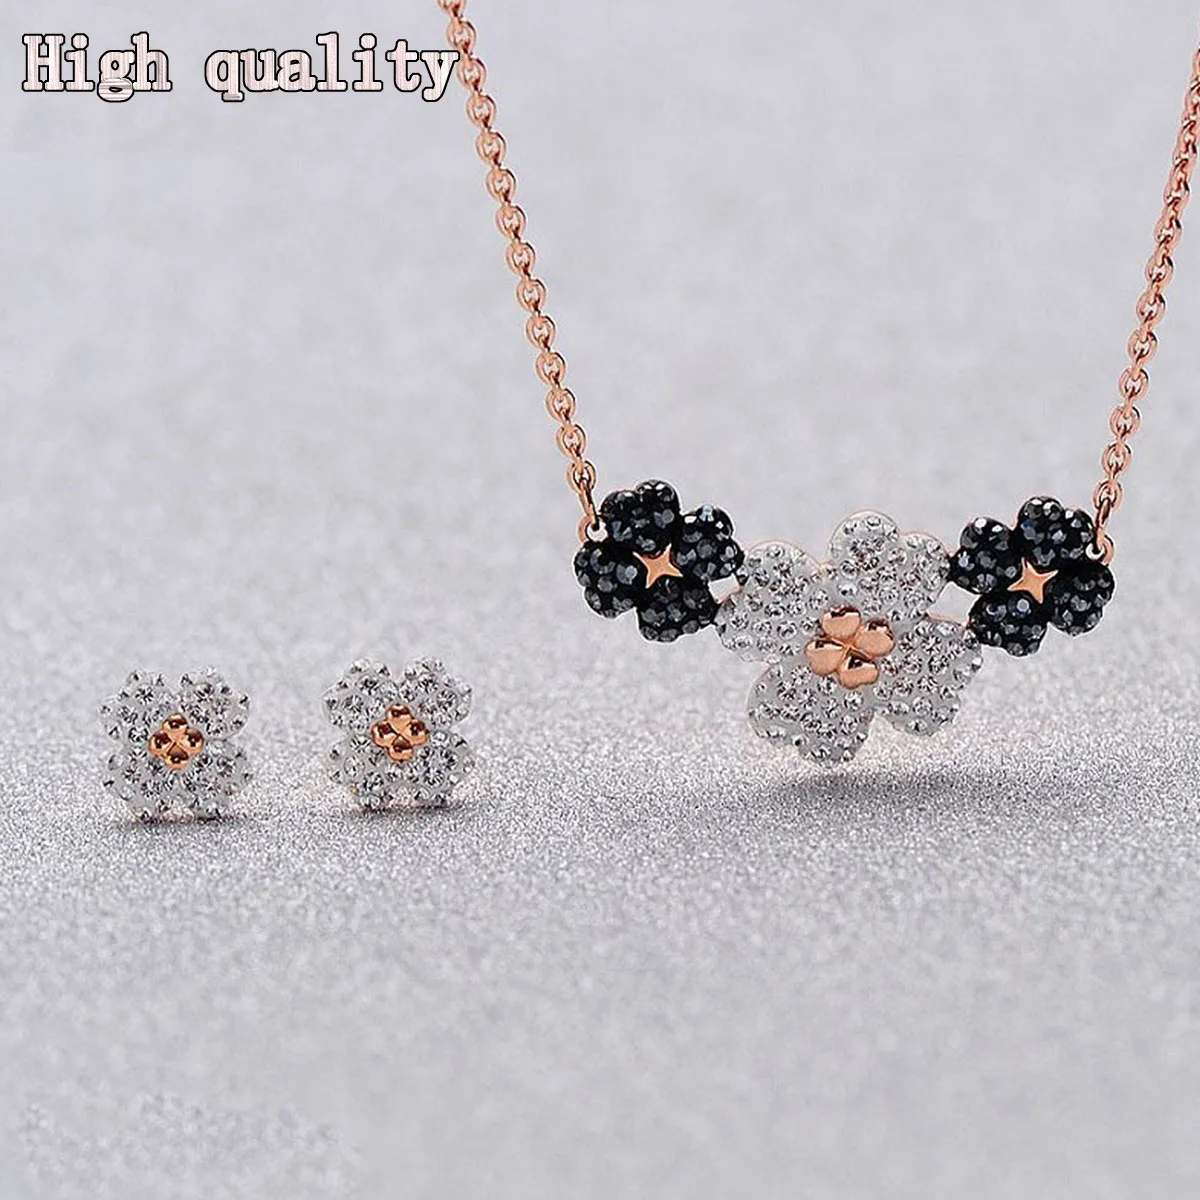 

High Quality SWA Fashion Jewelry Charm Crystal Black and White Clover Lucky Grass Women's Necklace Best Gift